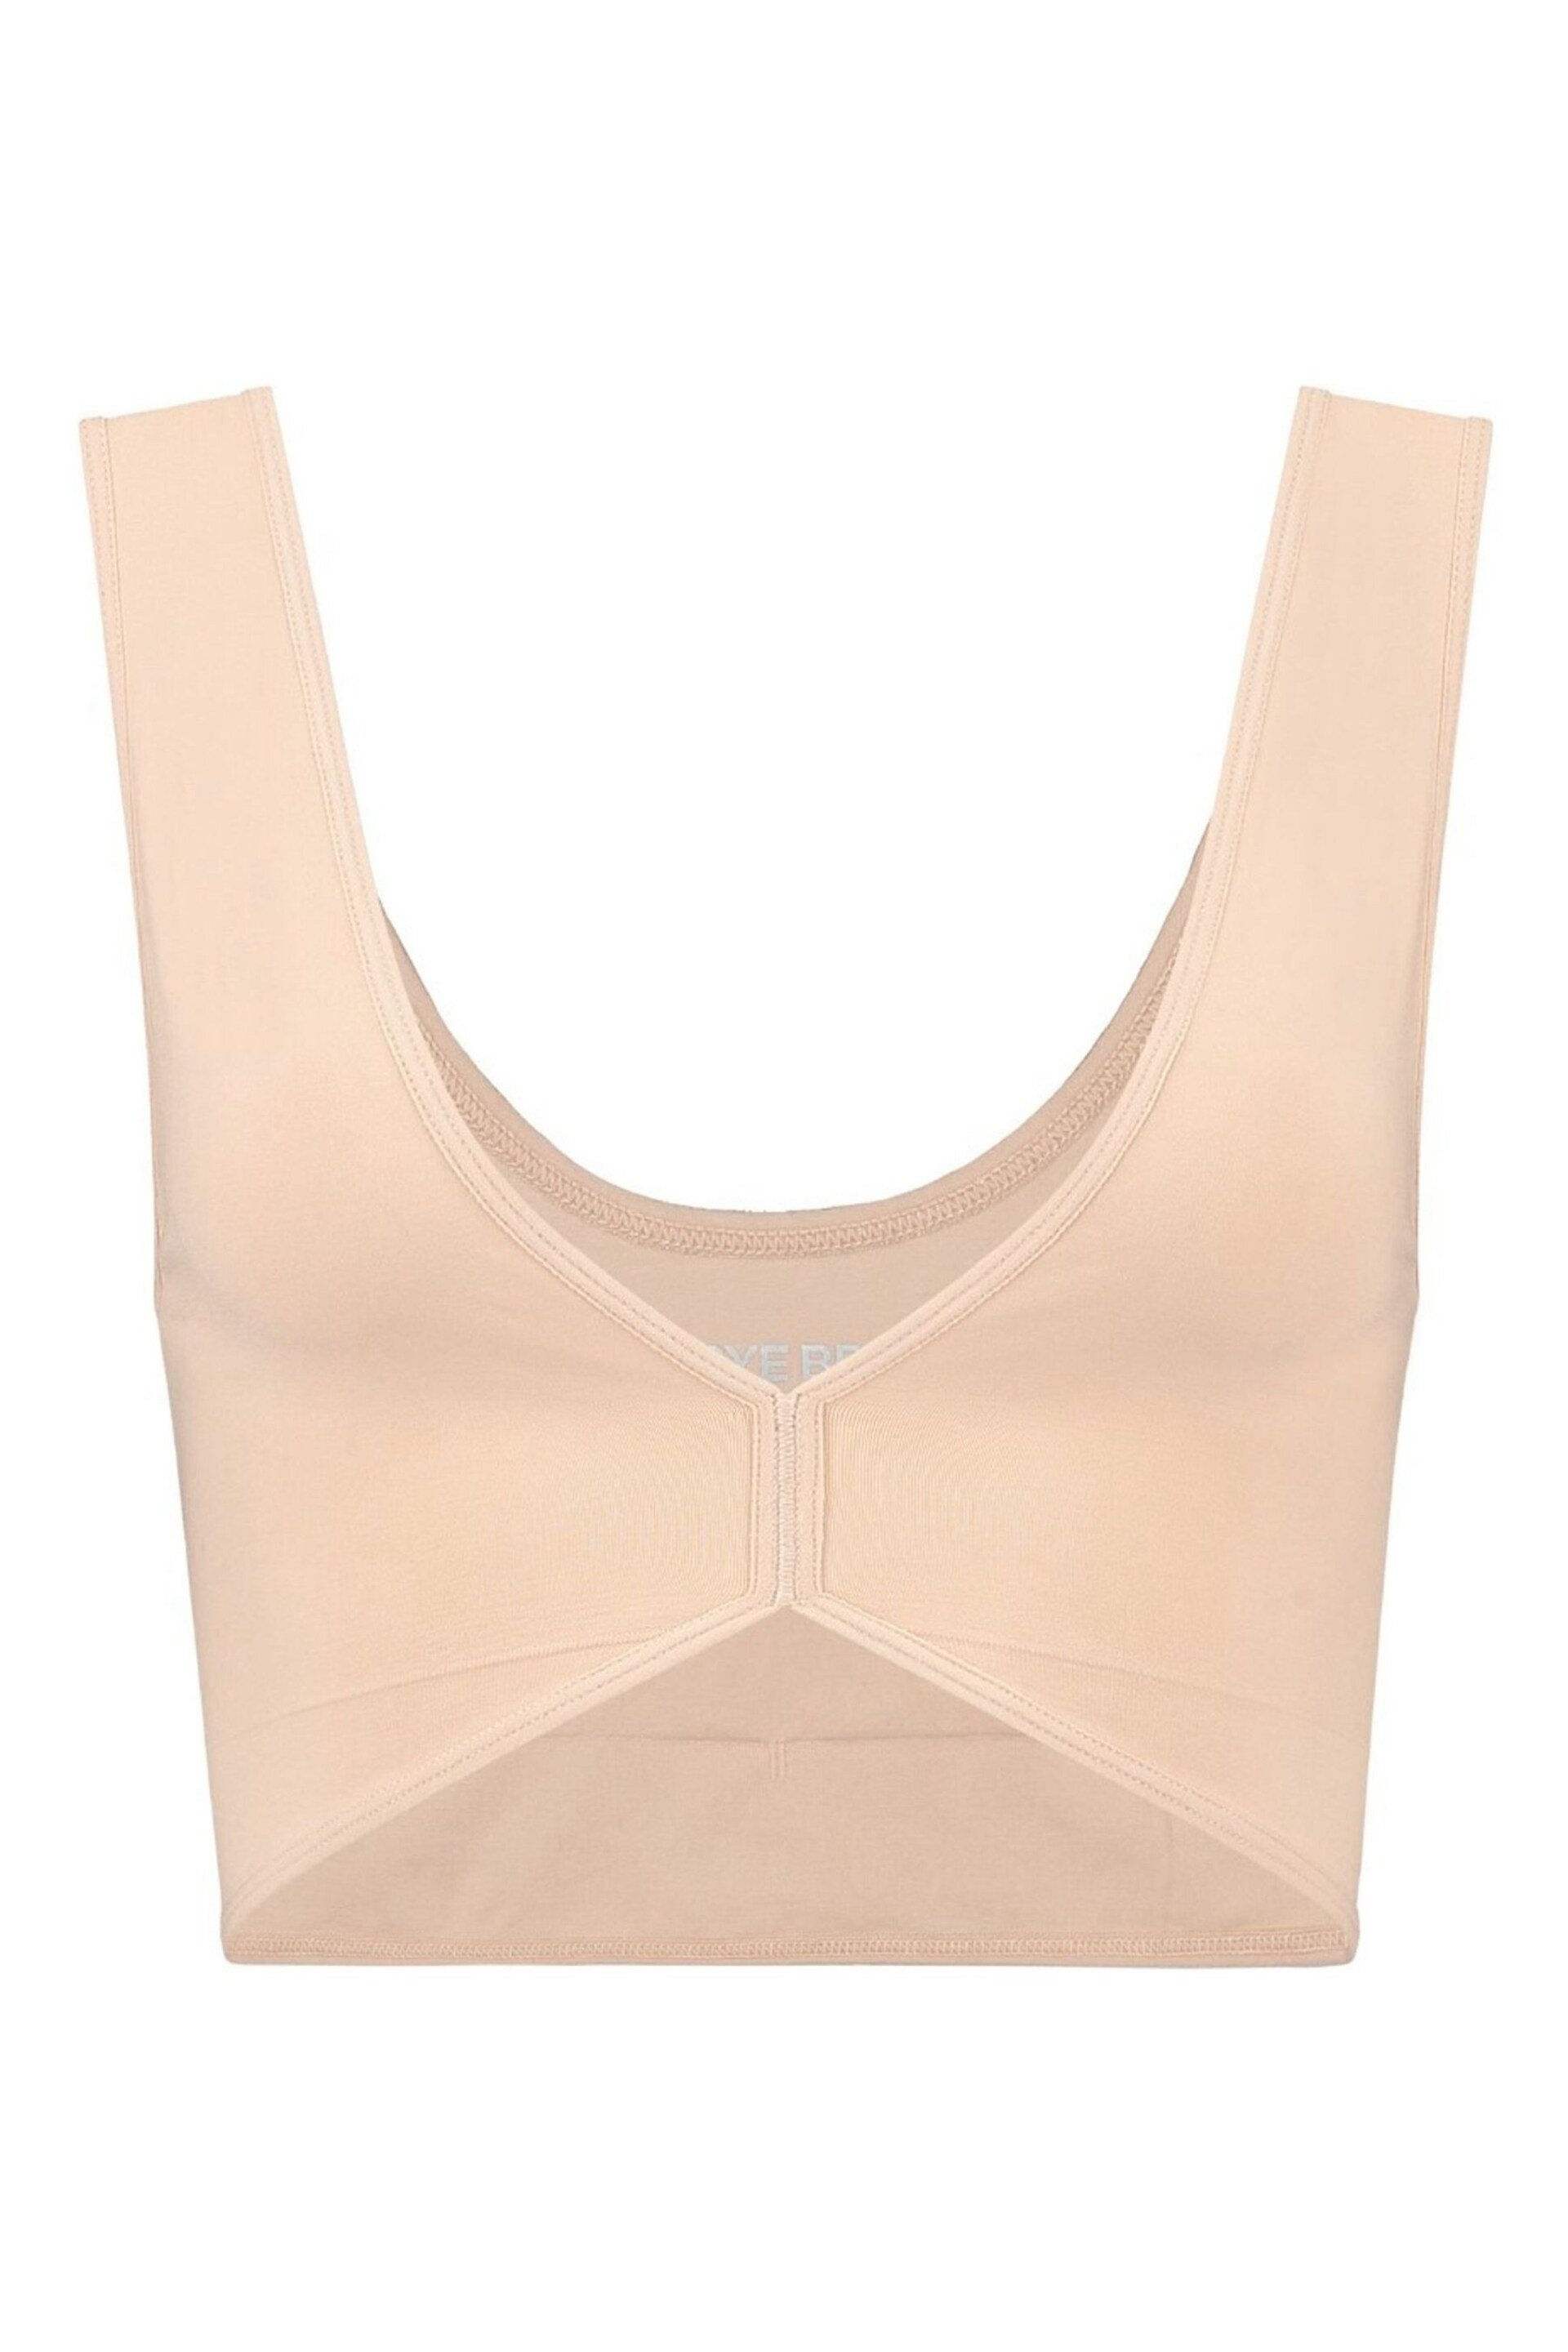 Bye Bra Soft Touch Reversible Bra Top - Image 3 of 4